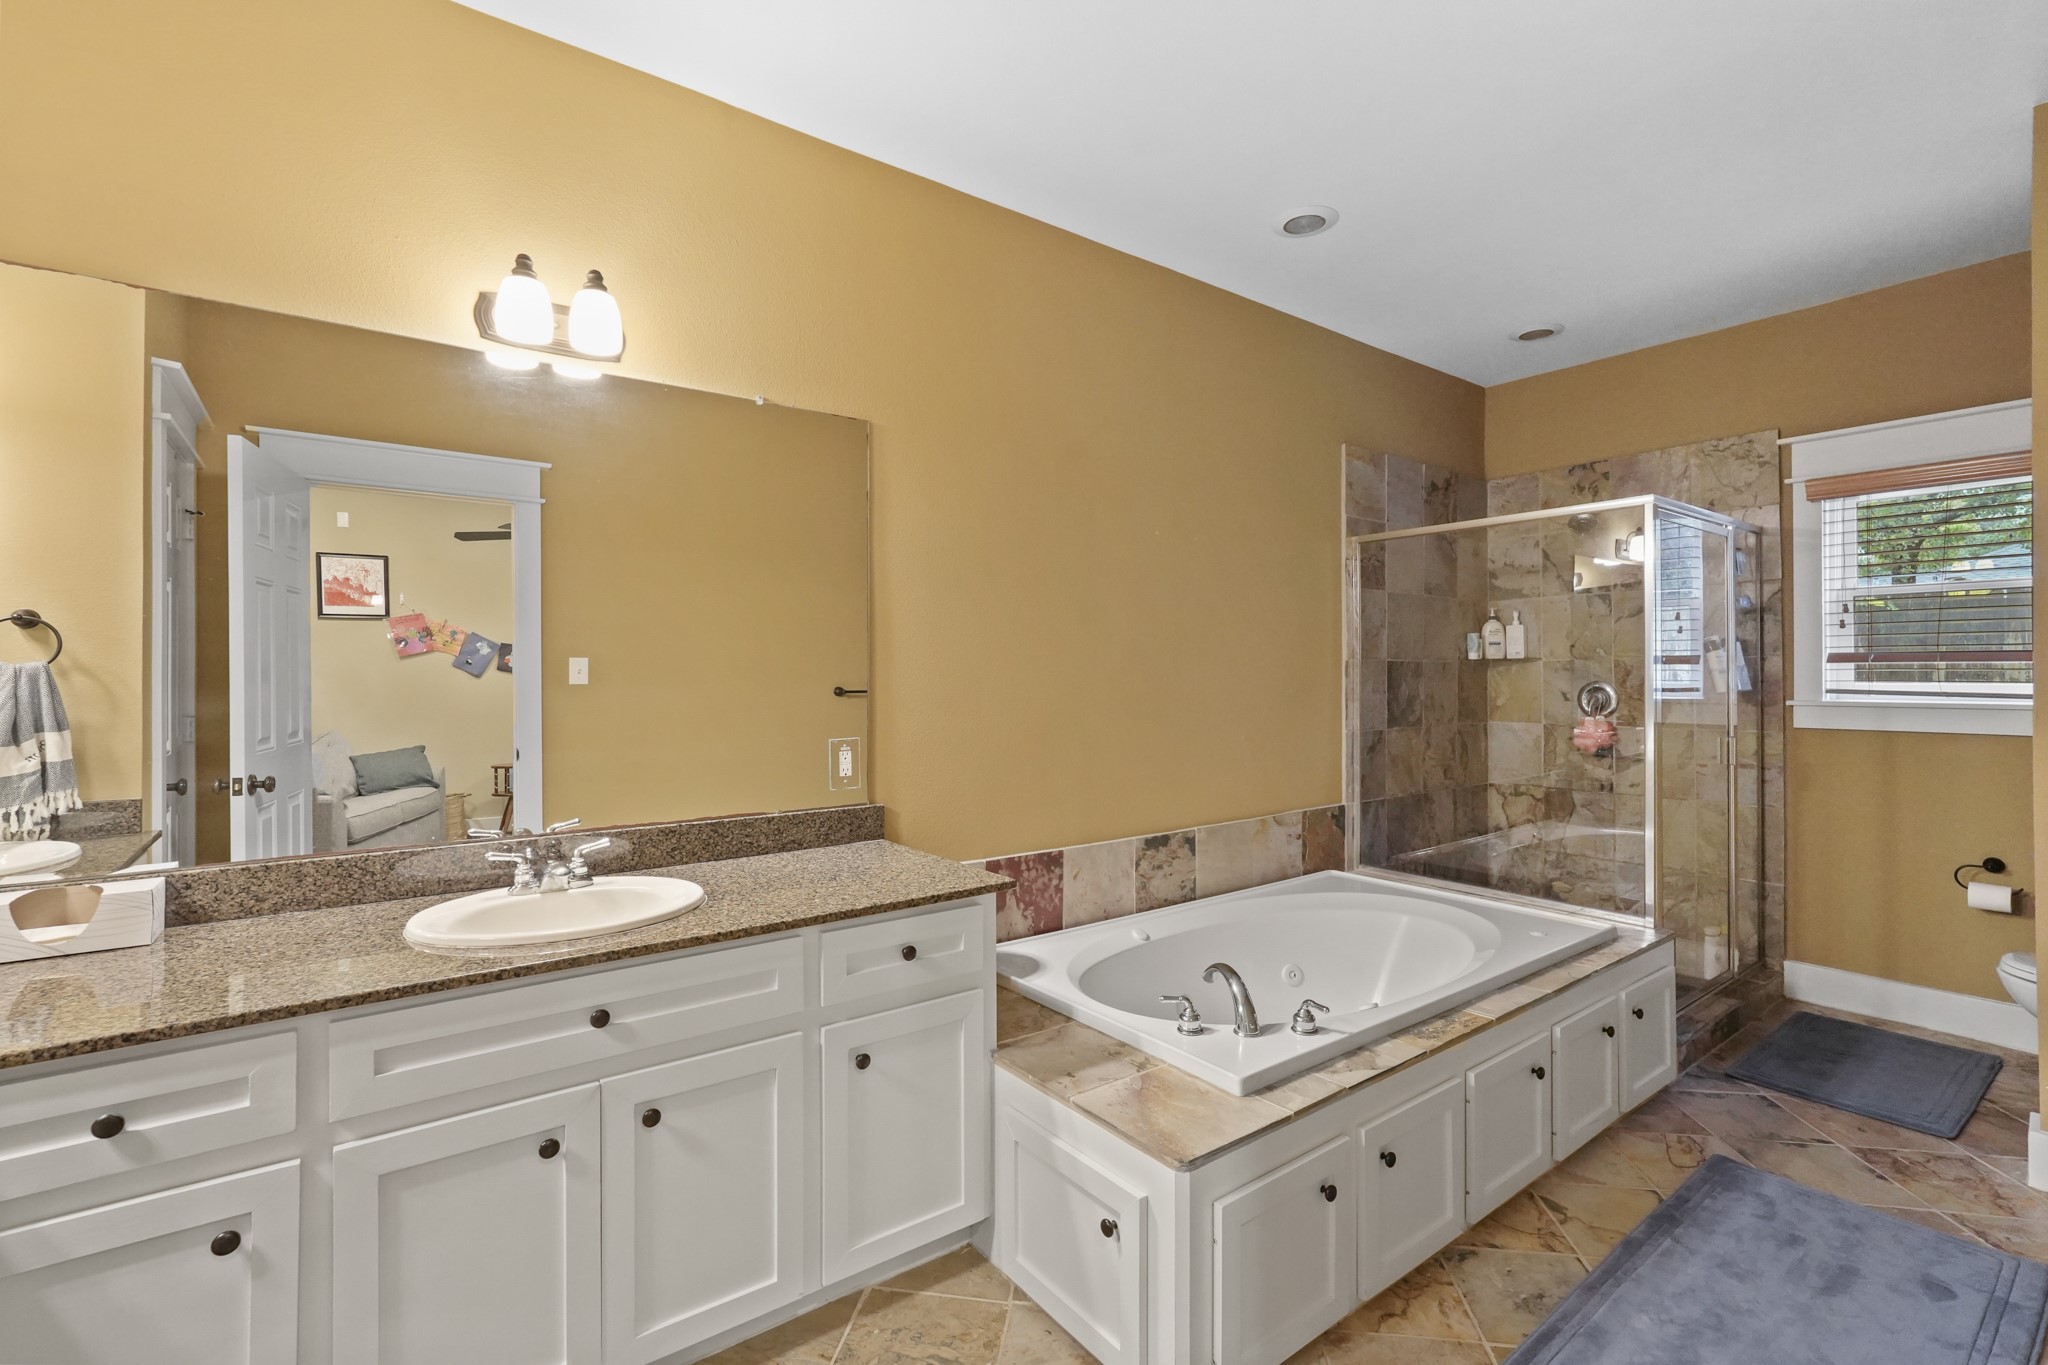 The primary bath features dual vanities & a separate tub & shower.